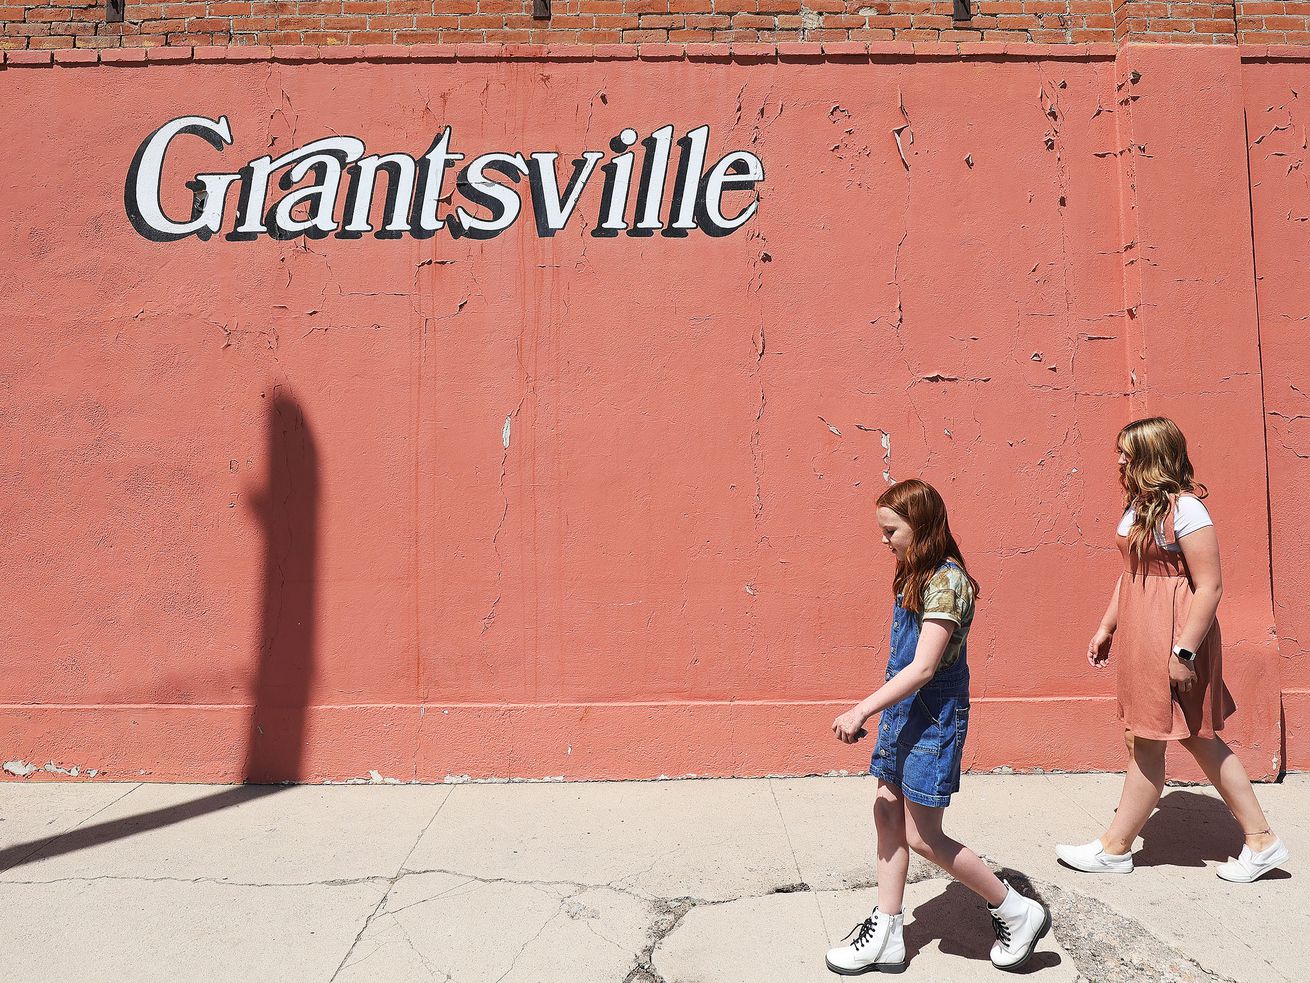 Lucie Moffitt, 10, and her sister, Lydia Moffitt, 14, walk to the ice cream store near their home in Grantsville on Friday, May 21, 2021. Their mother, Jamie Moffitt, decided to teach her children about safety and responsibility and then trust them to have a childhood.